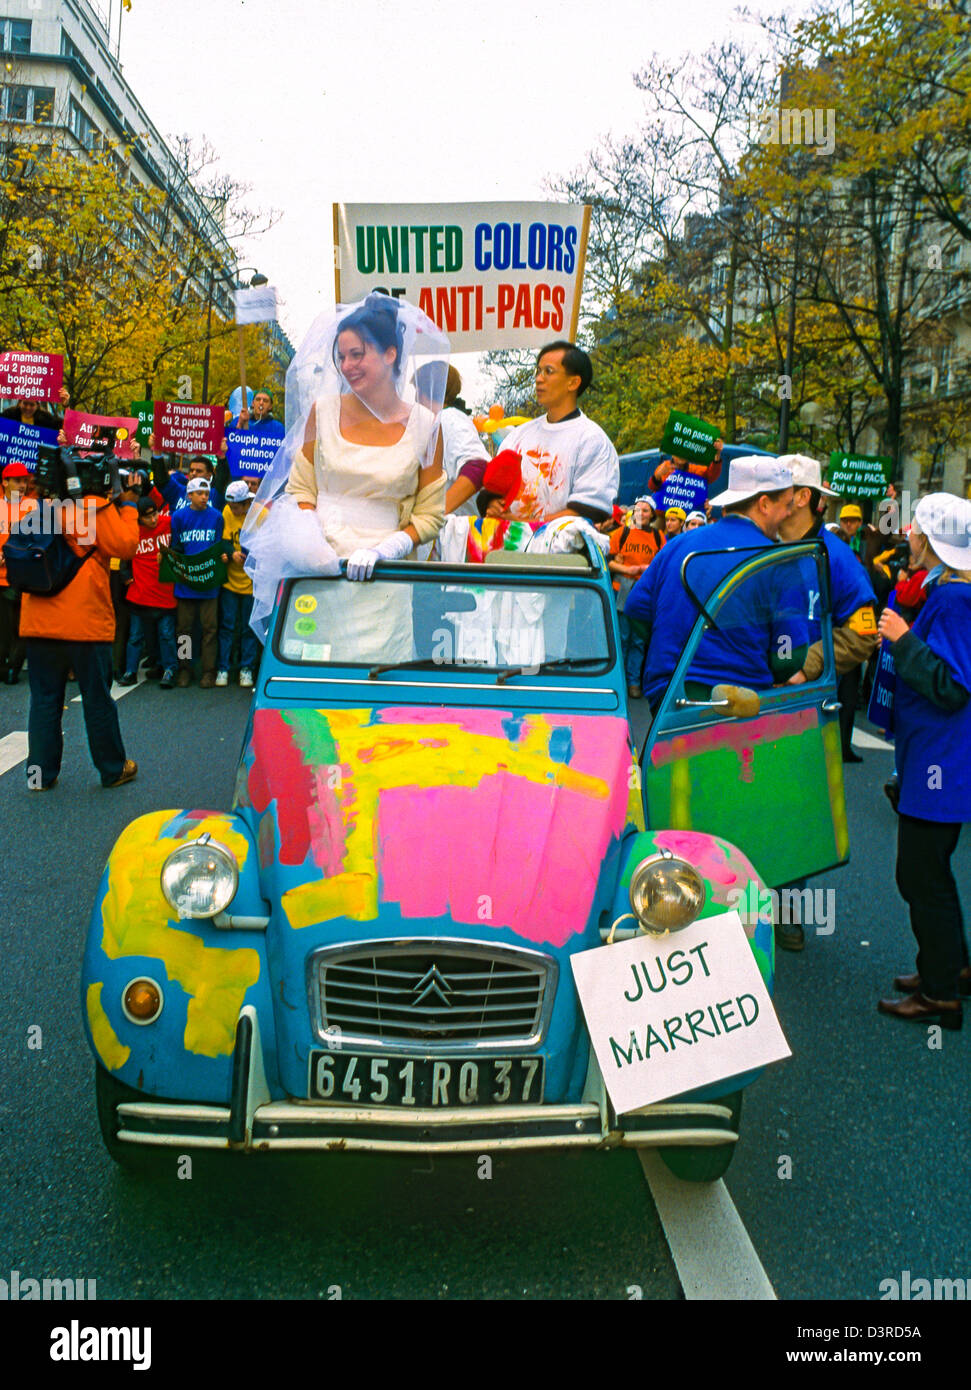 Paris, France. Public Demonstration, French Conservative Groups Protesting Against the Partnership Contract, Law, PACS (Pre-Gay Marriage) (Citroen 2CV Car, 1970s) Stock Photo